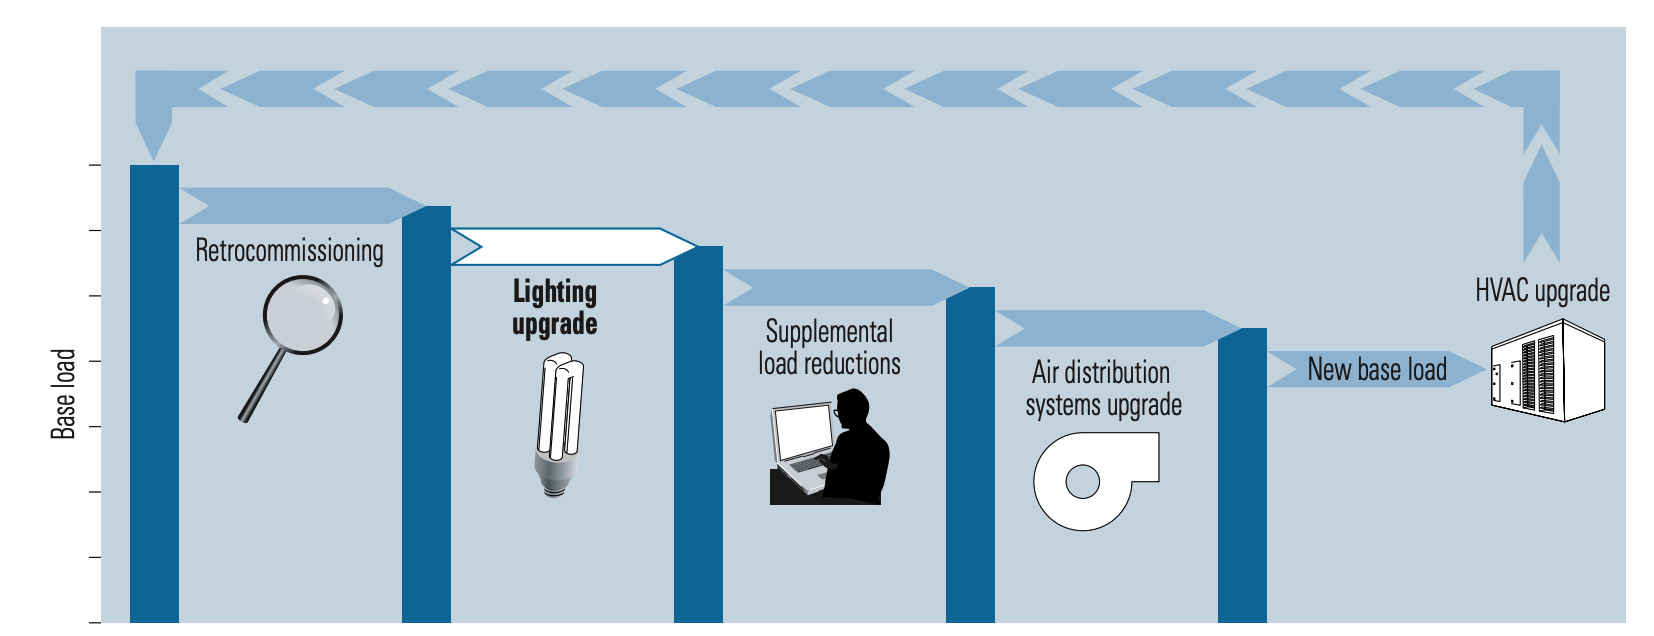 EPA stages of integrated lighting upgrade approach